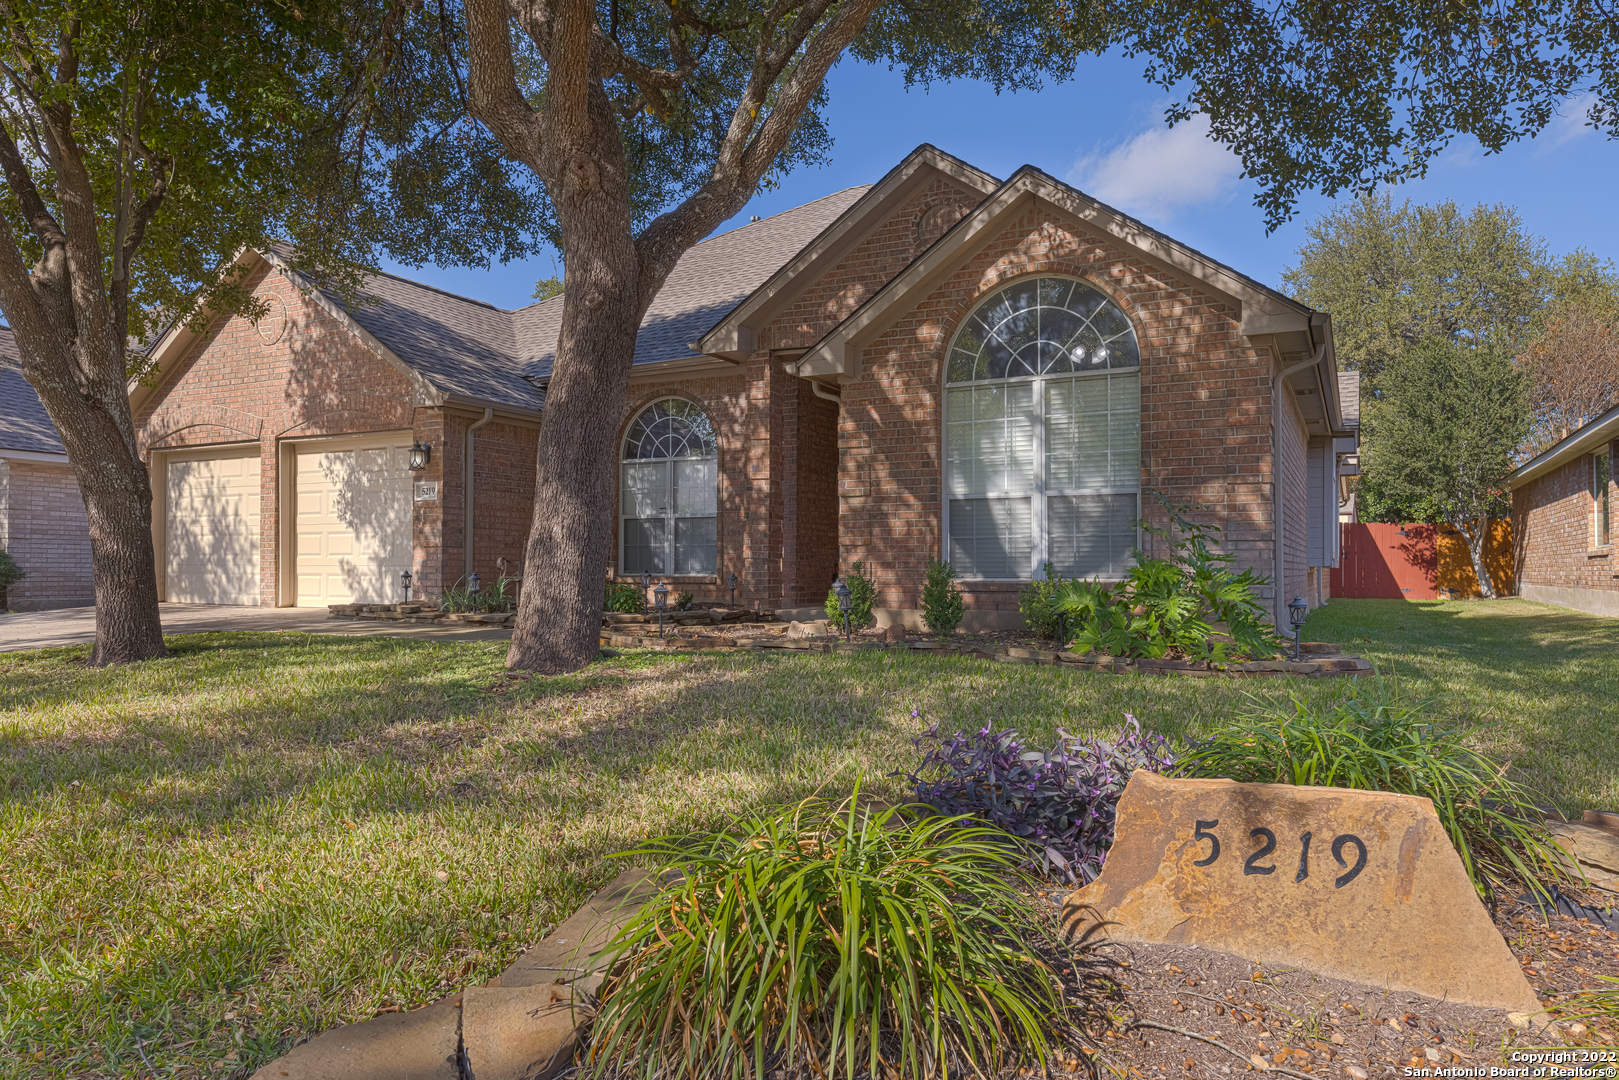 It's the most wonderful time of the year to tour this beautiful home!! Located in the desirable gated neighborhood of Oakland Heights in San Antonio, just minutes from I-10 & 1604. This home has a spacious open concept design w/ tall ceilings and lots of natural light throughout. There are two living areas, a dining room and an eat-in-kitchen. High end finishes w/ marble countertops and wood floors. The island kitchen features double ovens, a cooktop and a breakfast bar. This home is light & bright and has touches of character throughout such as the front door, fireplace, ceiling detail and upscale bathrooms. A private patio/courtyard can be seen from the living room and primary bedroom windows. Great backyard includes a storage shed. Prime location close to the RIM, La Cantera, UTSA, & Six Flags. Come out and tour this gorgeous, one of a kind property today!!